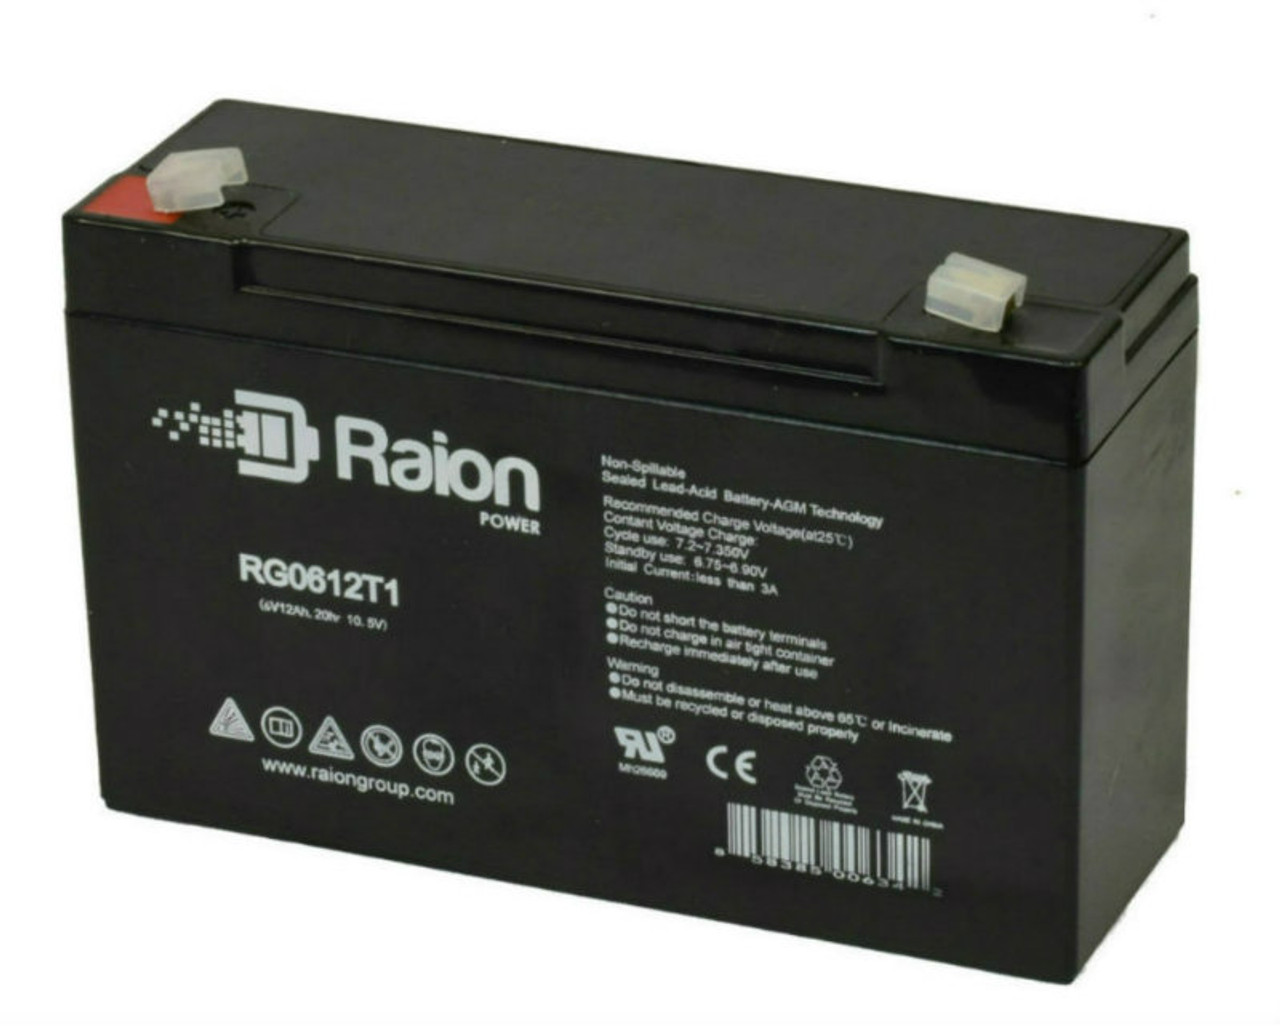 Raion Power RG06120T1 Replacement Battery for Kaufel 2189